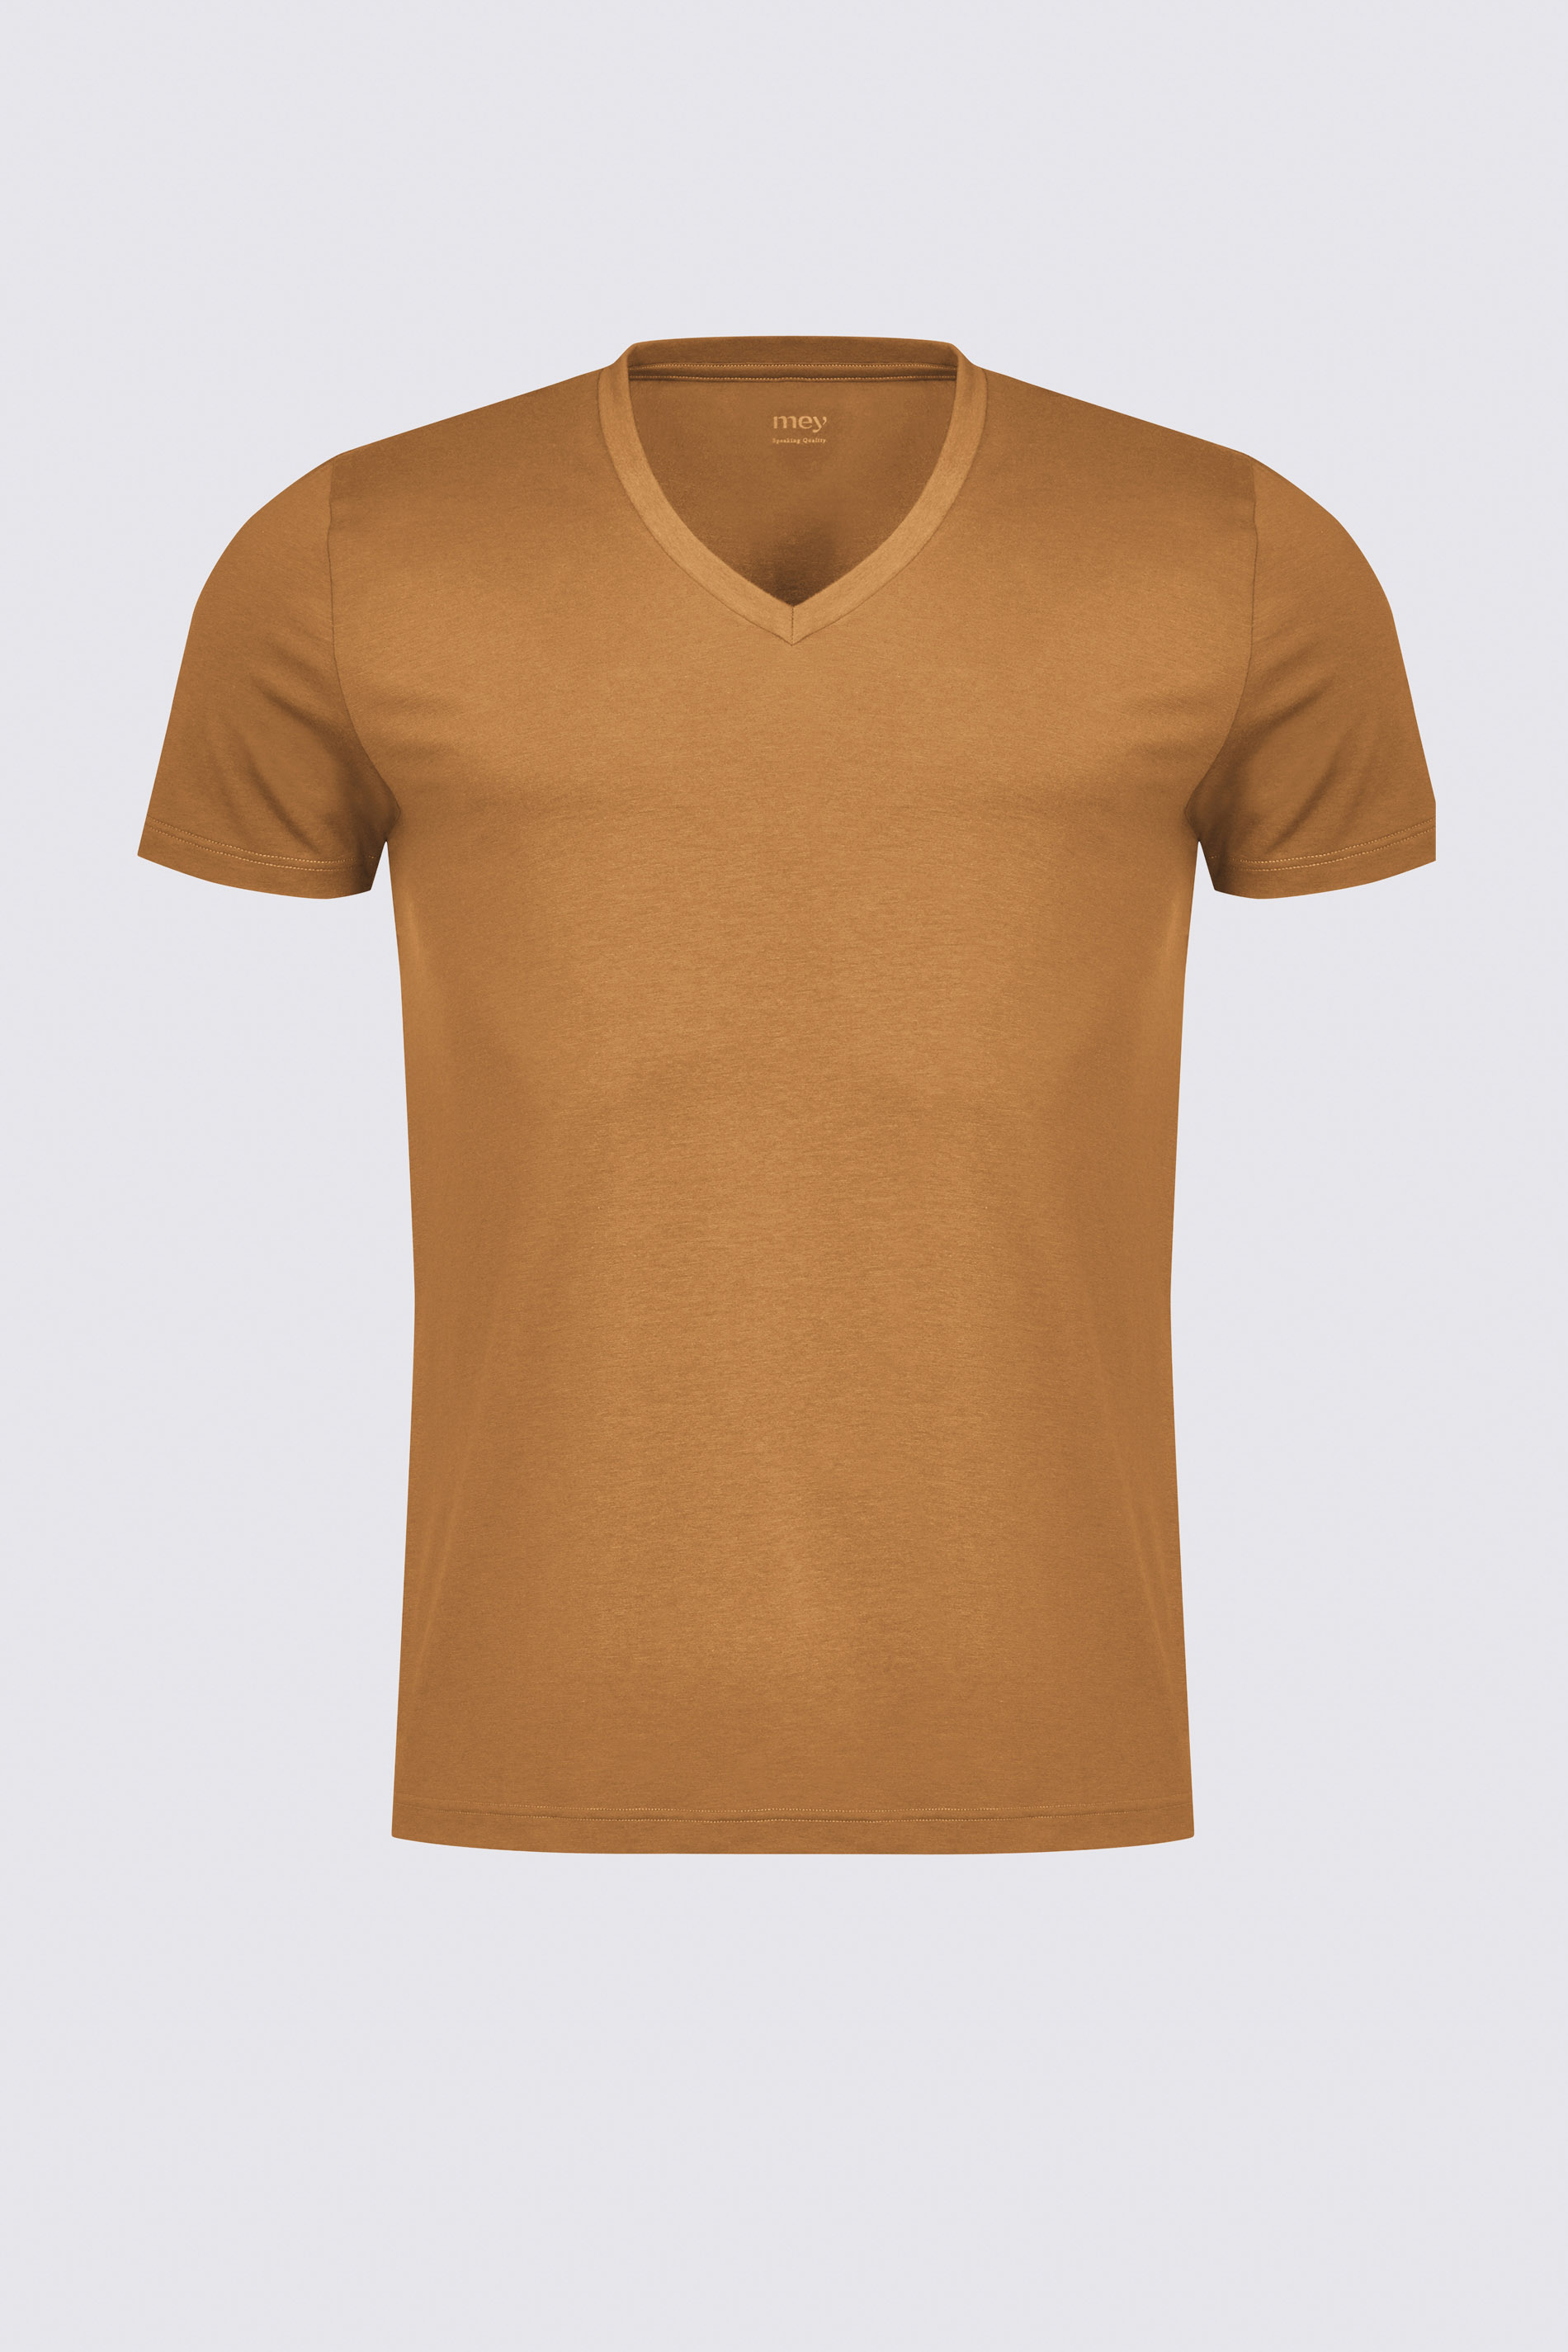 V neck shirt Brown Toffee Dry Cotton Colour Cut Out | mey®